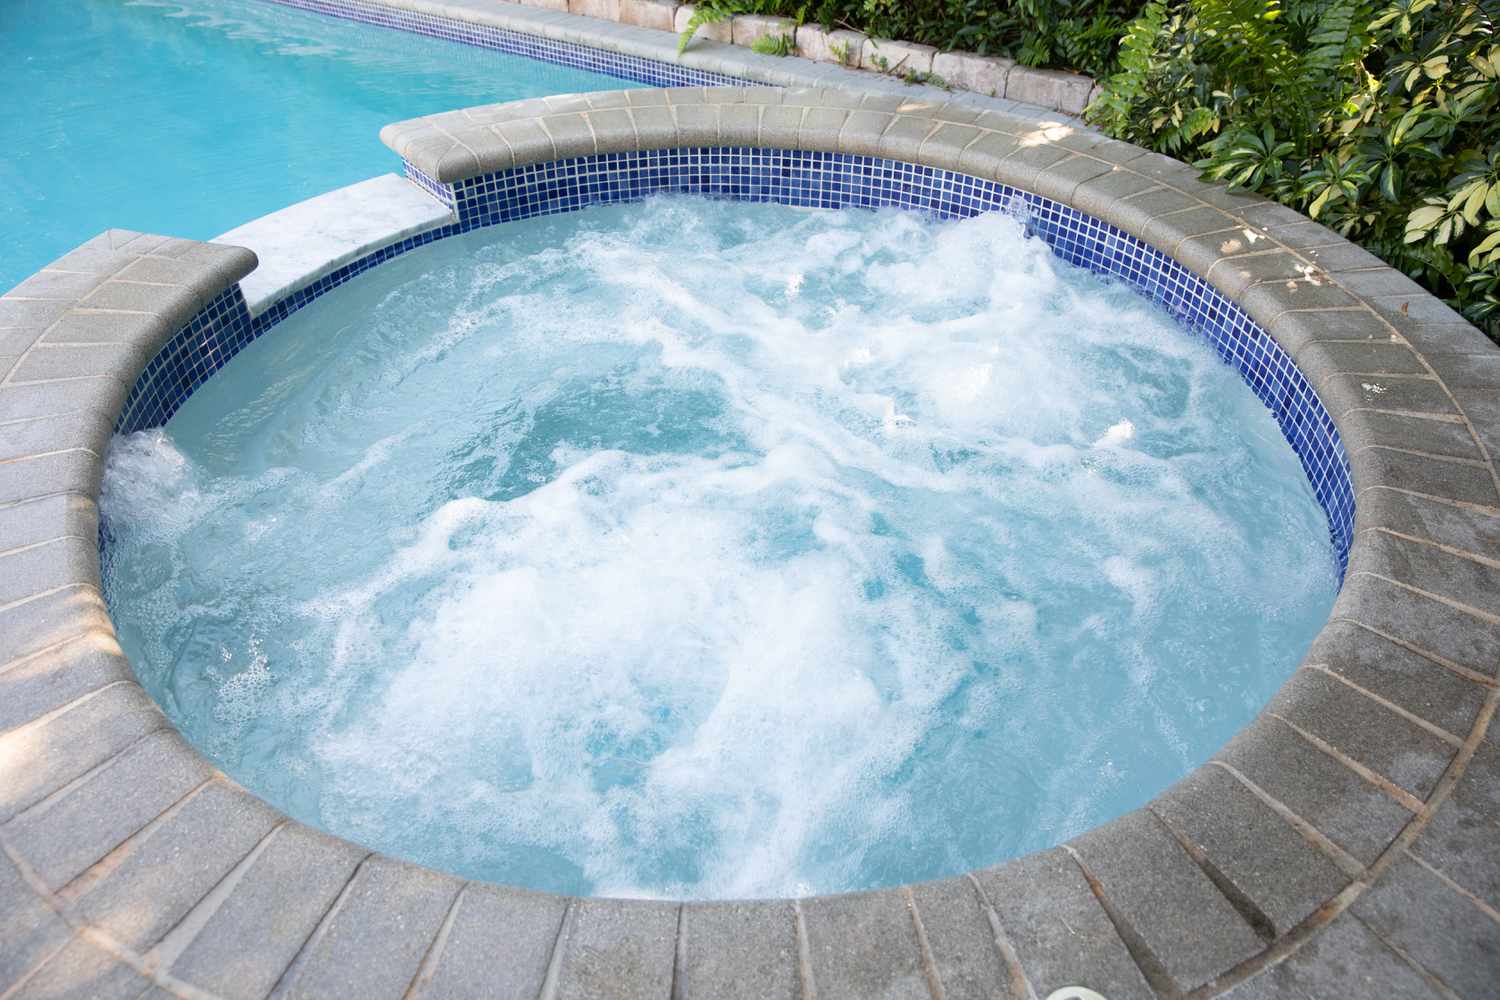 Outdoor hot tub with water churning inside